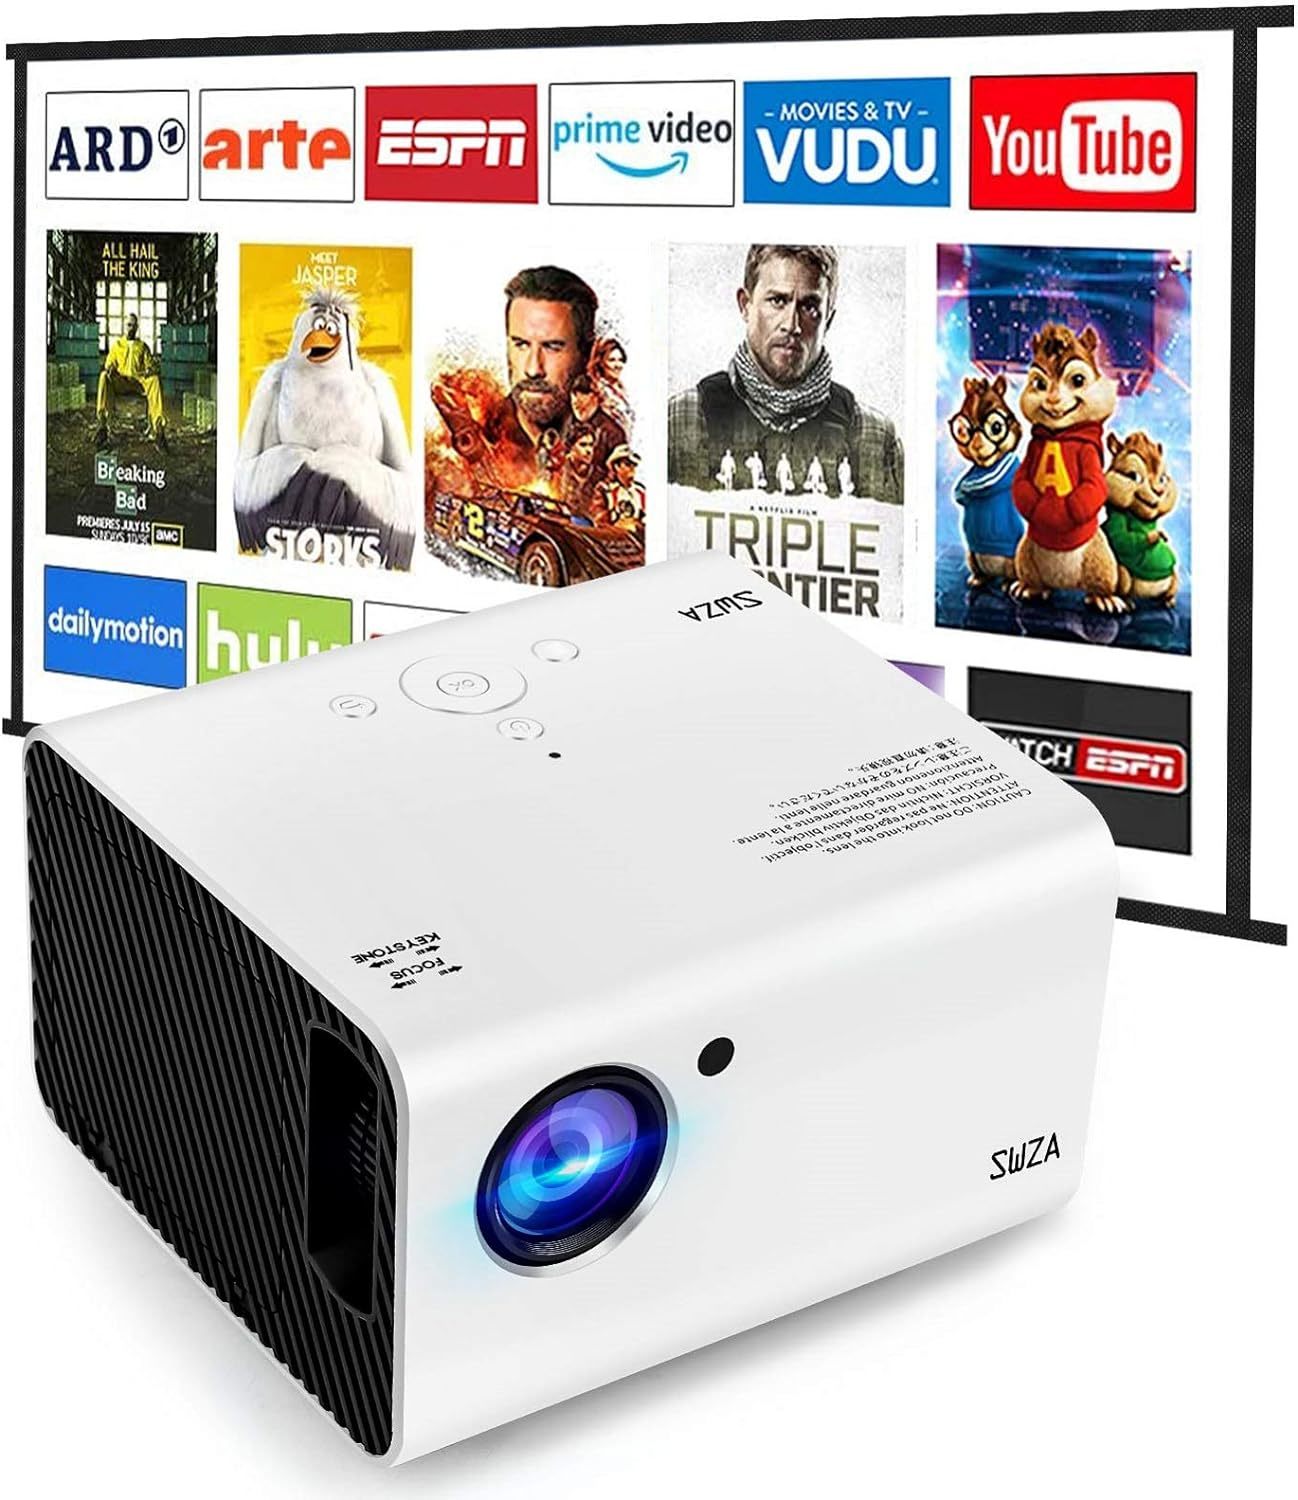 YABER Y30 Native 1080P Projector 7500L Full HD Video Projector 1920 x 1080